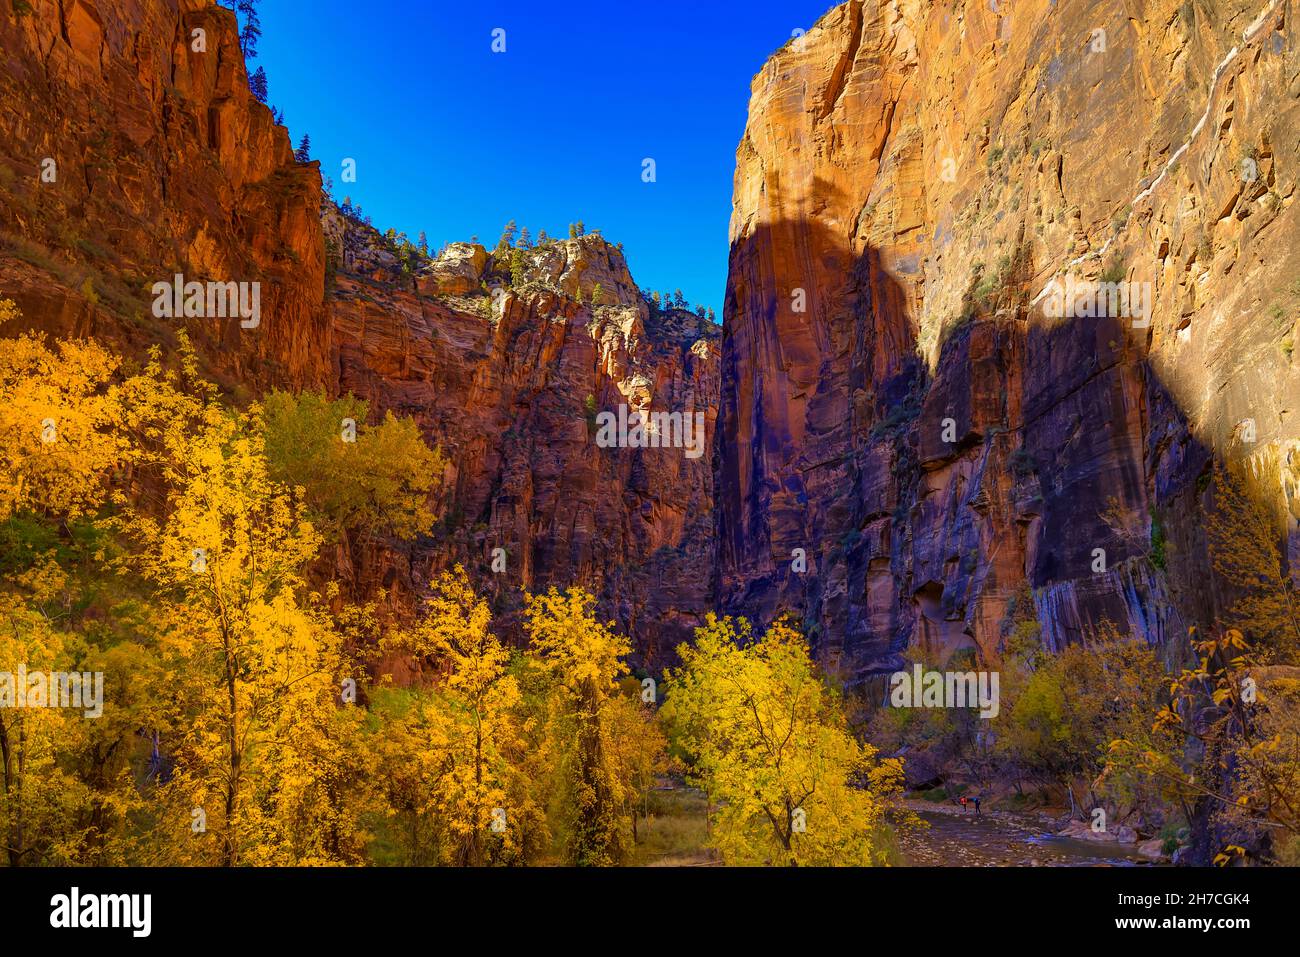 Towering red rock cliffs and colors of the fall season as seen along the Riverside Walk trail in Zion National Park, Springdale, Utah, USA. Stock Photo